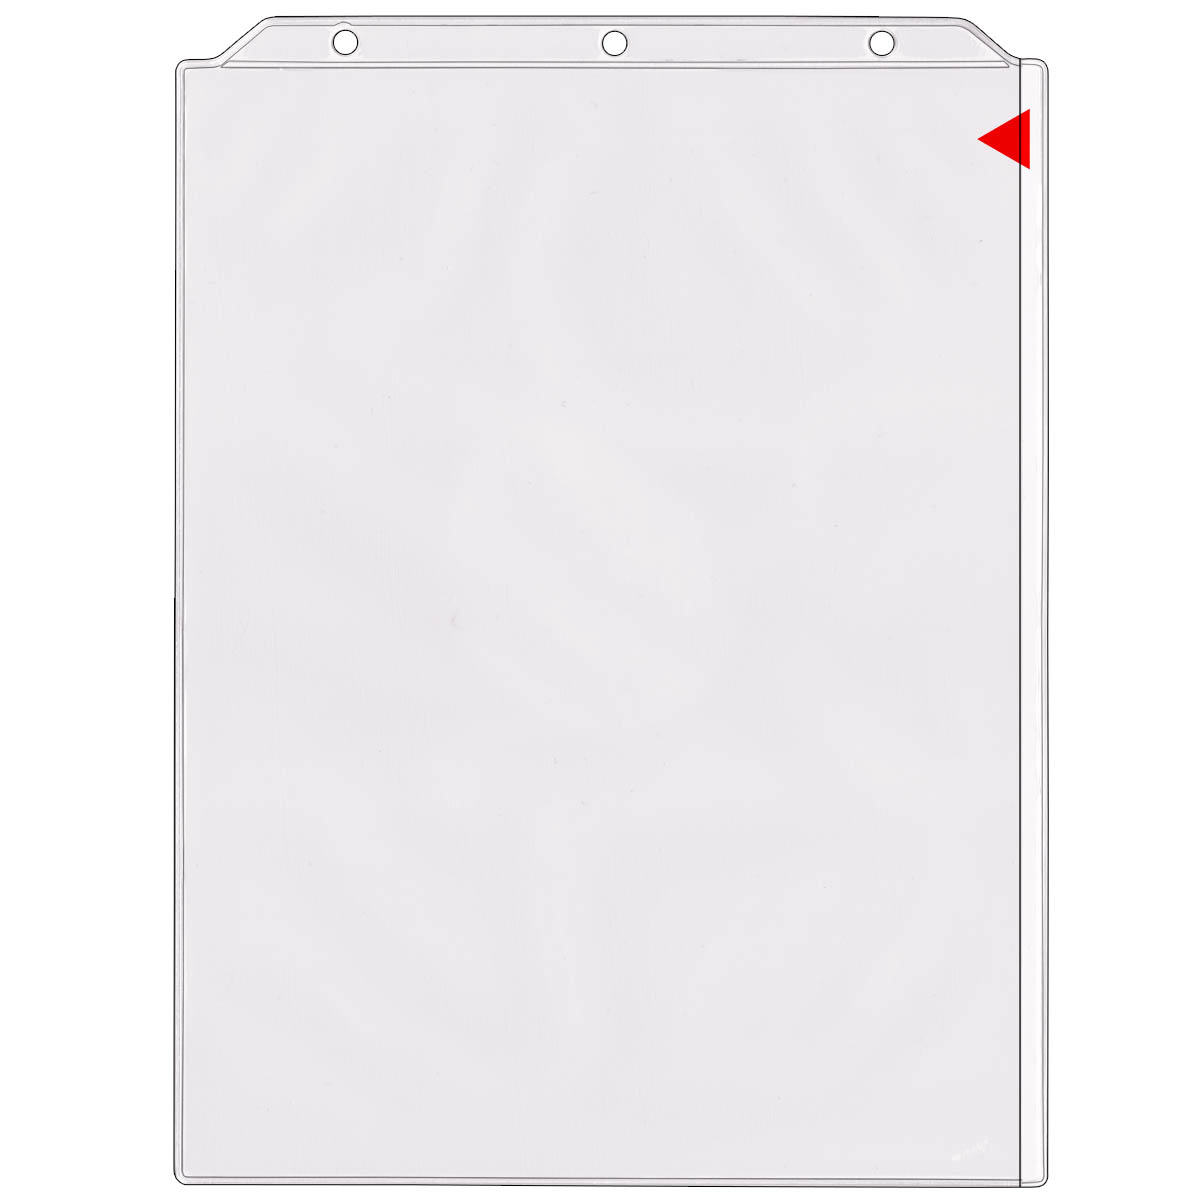 S/O Full Page Vinyl Sheet Protectors - First Products